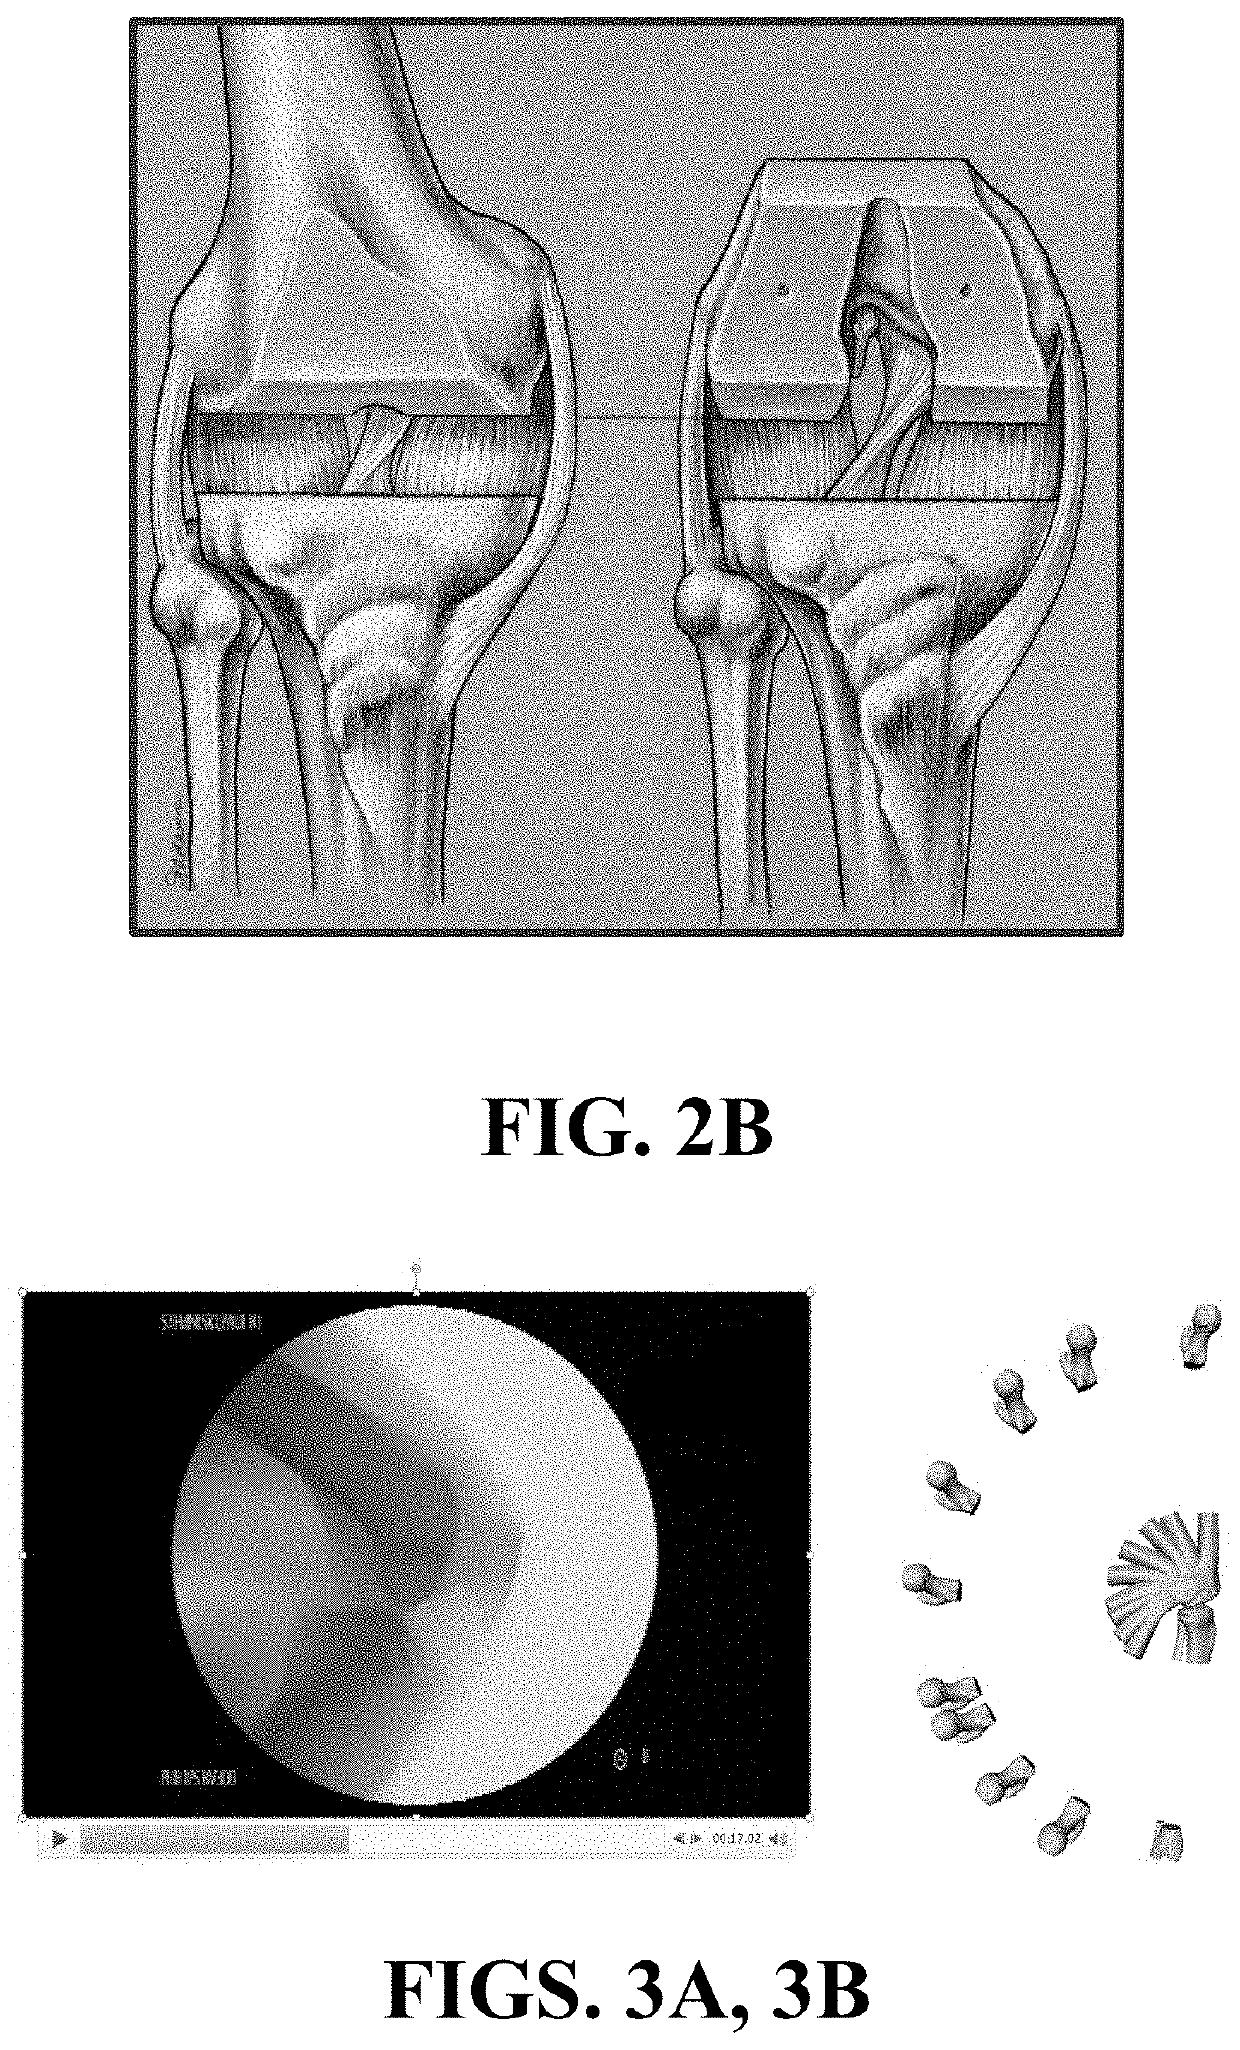 Kinematic Alignment and Novel Femoral and Tibial Prosthetics